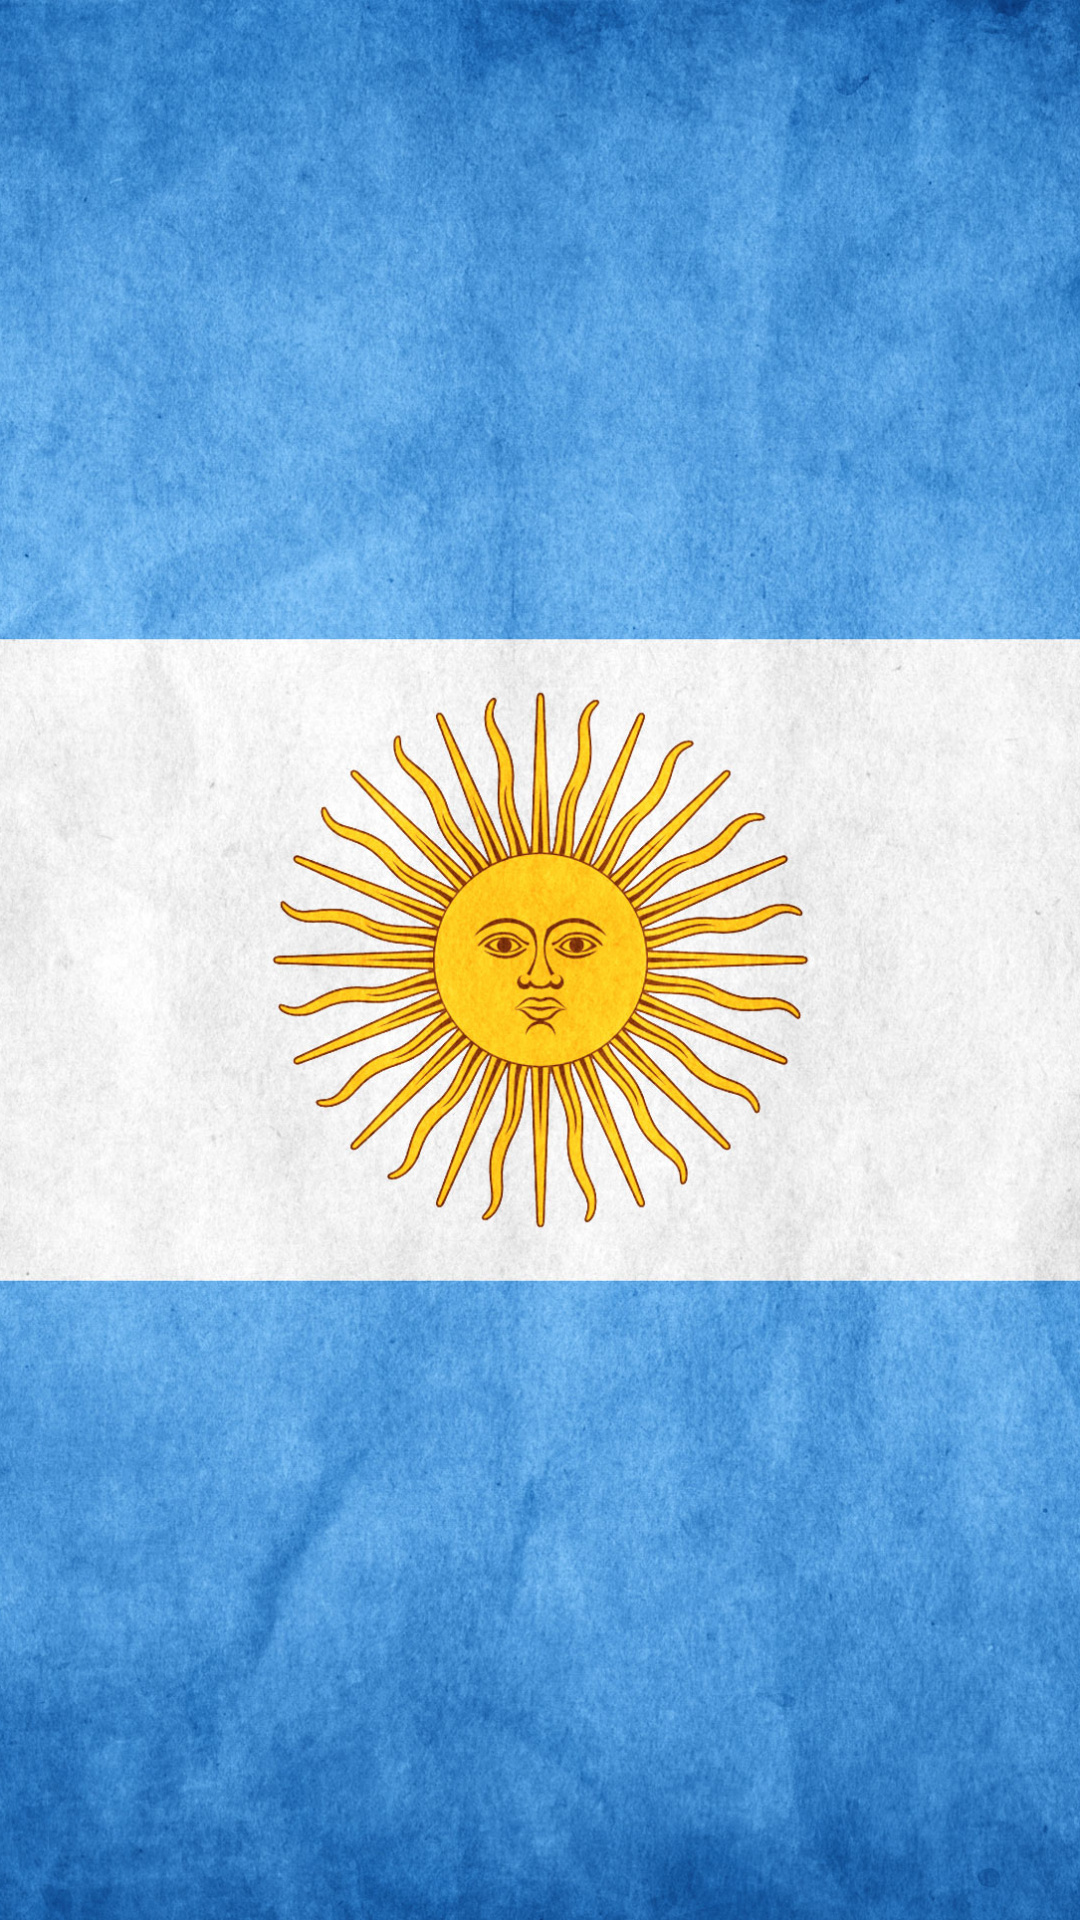 Argentina: A home to Aconcagua, the highest peak in the Americas. 1080x1920 Full HD Background.